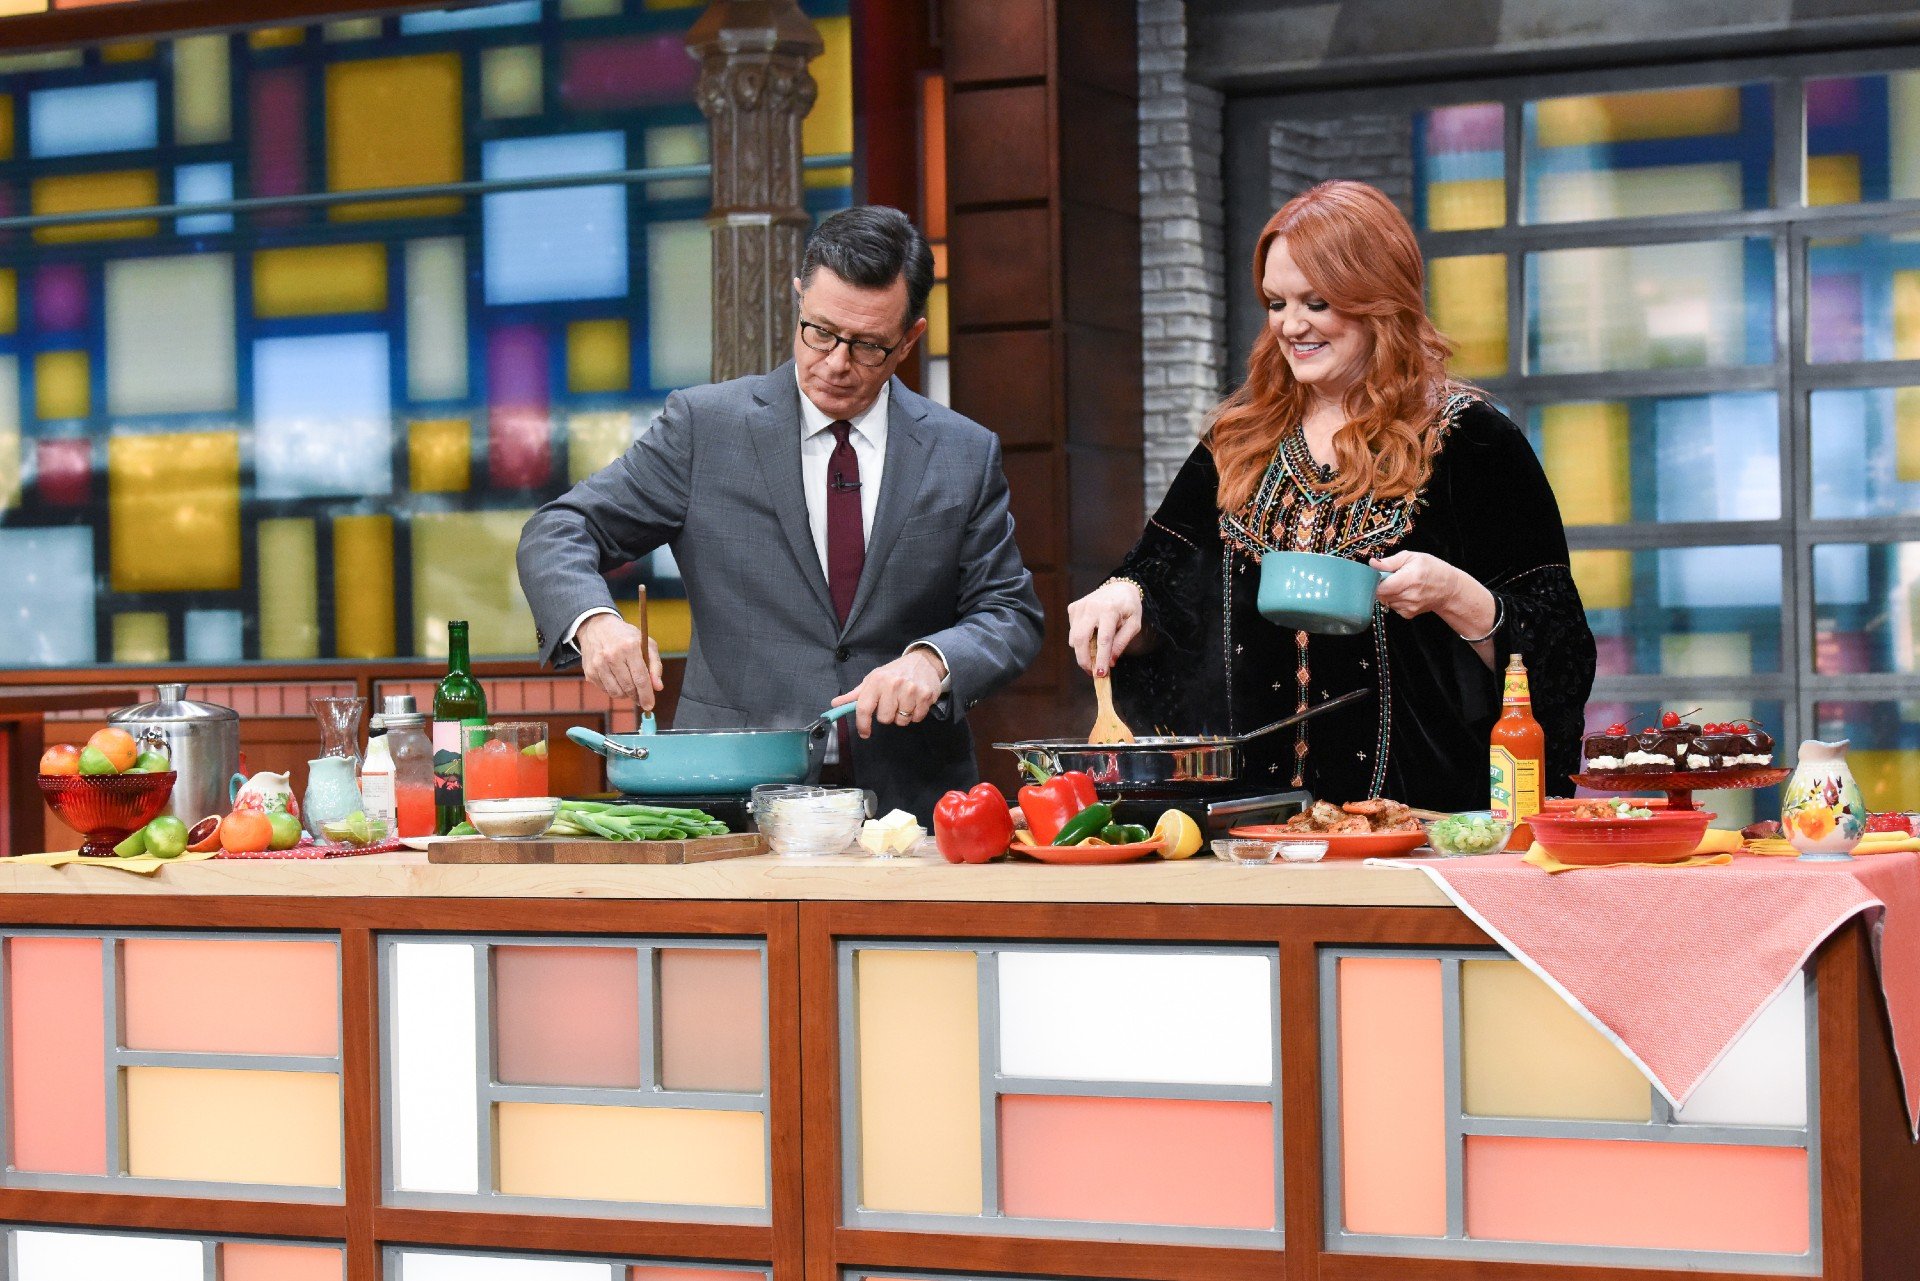 Ree Drummond wears a black, velvet top while giving a cooking demonstration on Stephen Colbert's talk show.